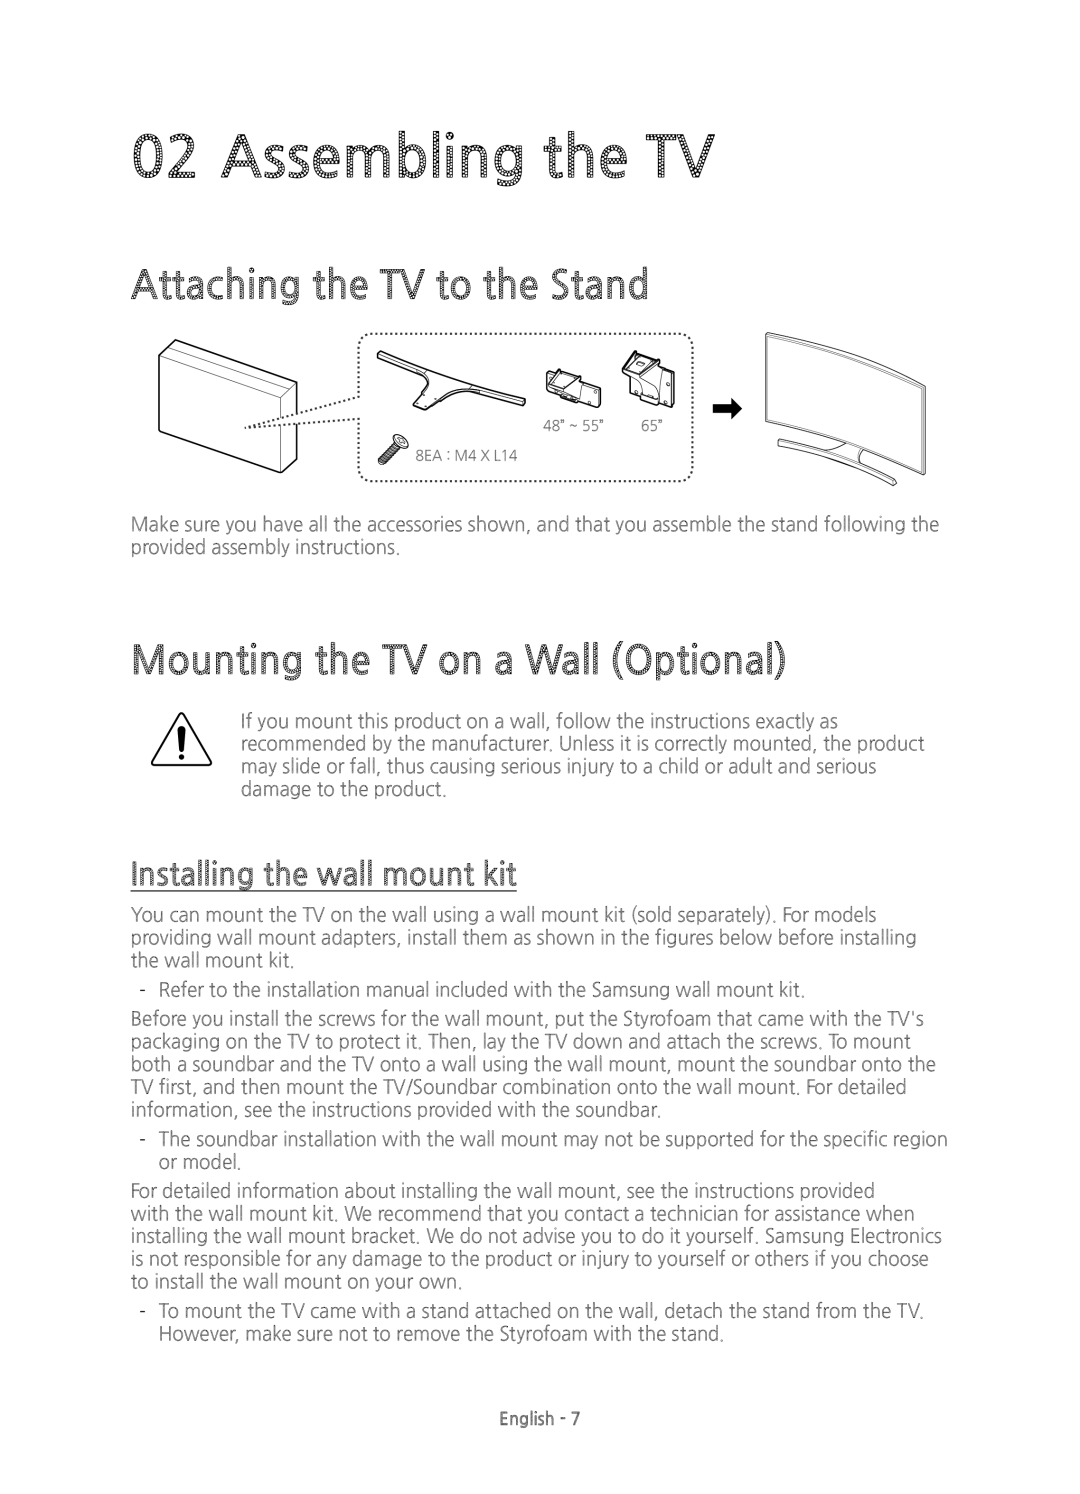 Samsung UE48JU7500TXZT manual Assembling the TV, Attaching the TV to the Stand, Mounting the TV on a Wall Optional 